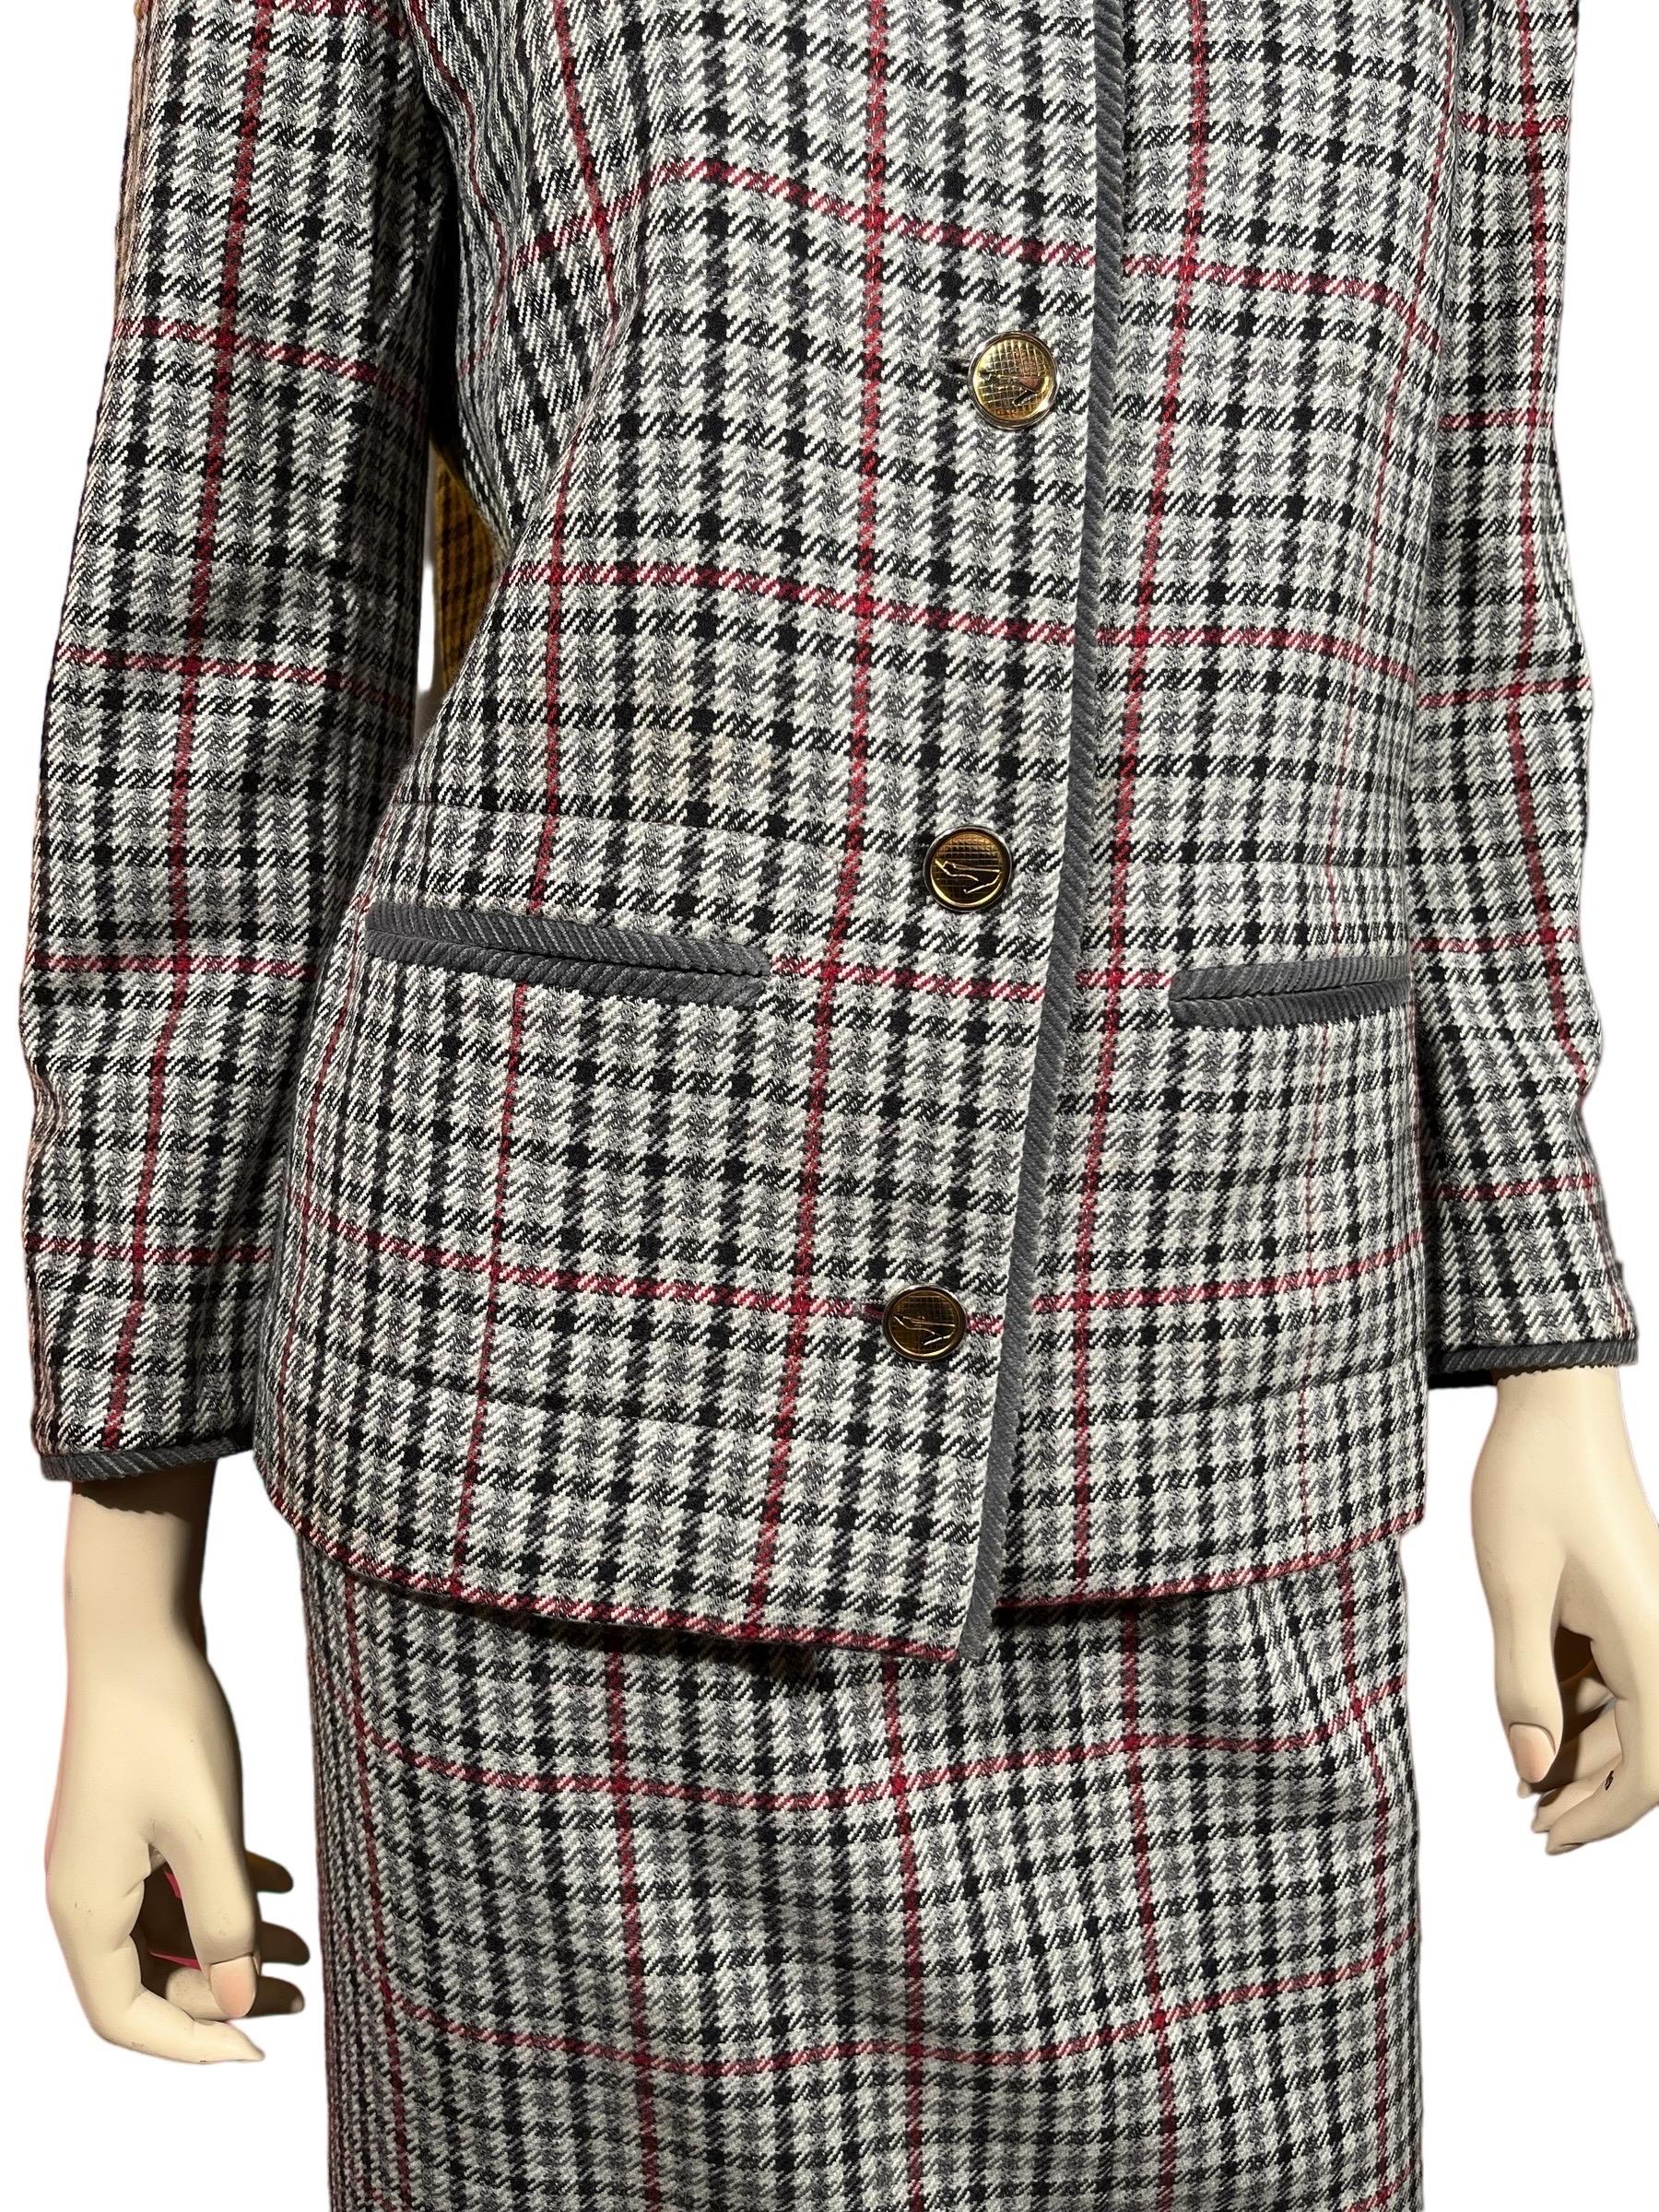 Vintage 1990’s Chanel Boutique Gray Plaid Wool Suit Set  In Excellent Condition For Sale In Greenport, NY